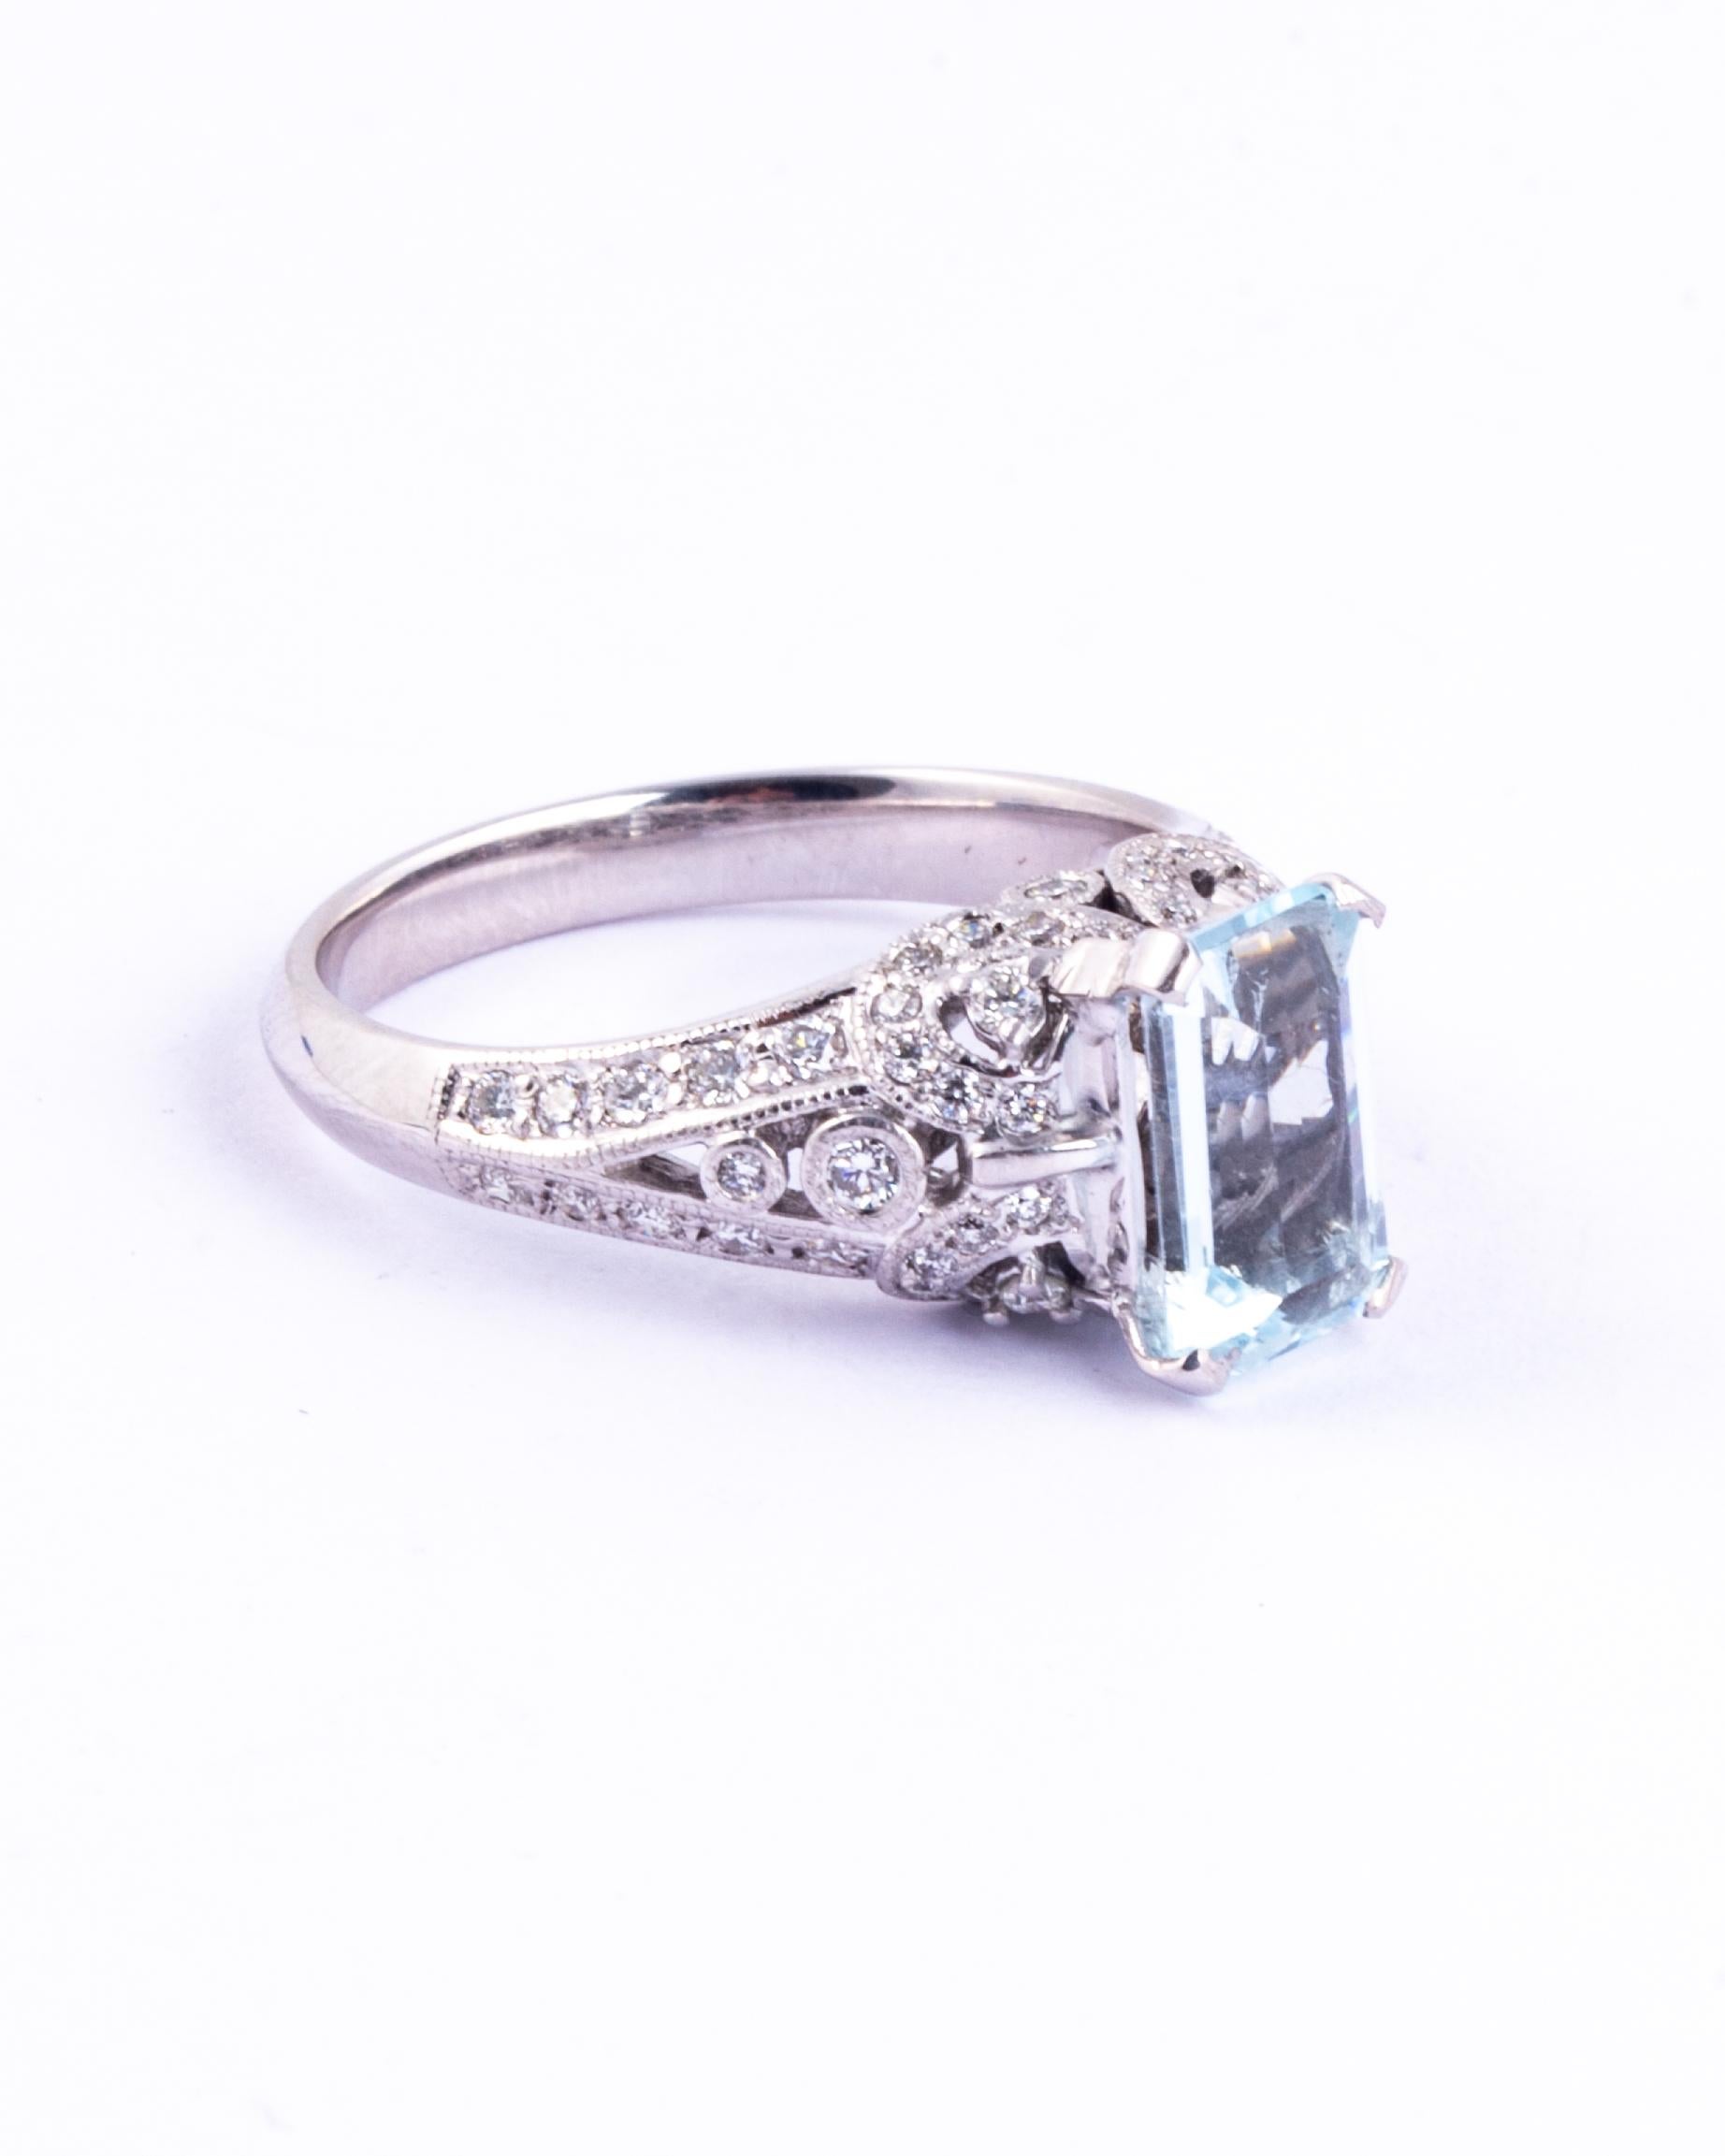 Set high in simple claws modelled in platinum is the most stunning aqua stone. The gallery and shoulders are diamond encrusted totalling approx 90pts. The aqua is a pale blue and is emerald cut which reflects the light beautifully.

Ring Size: Q or